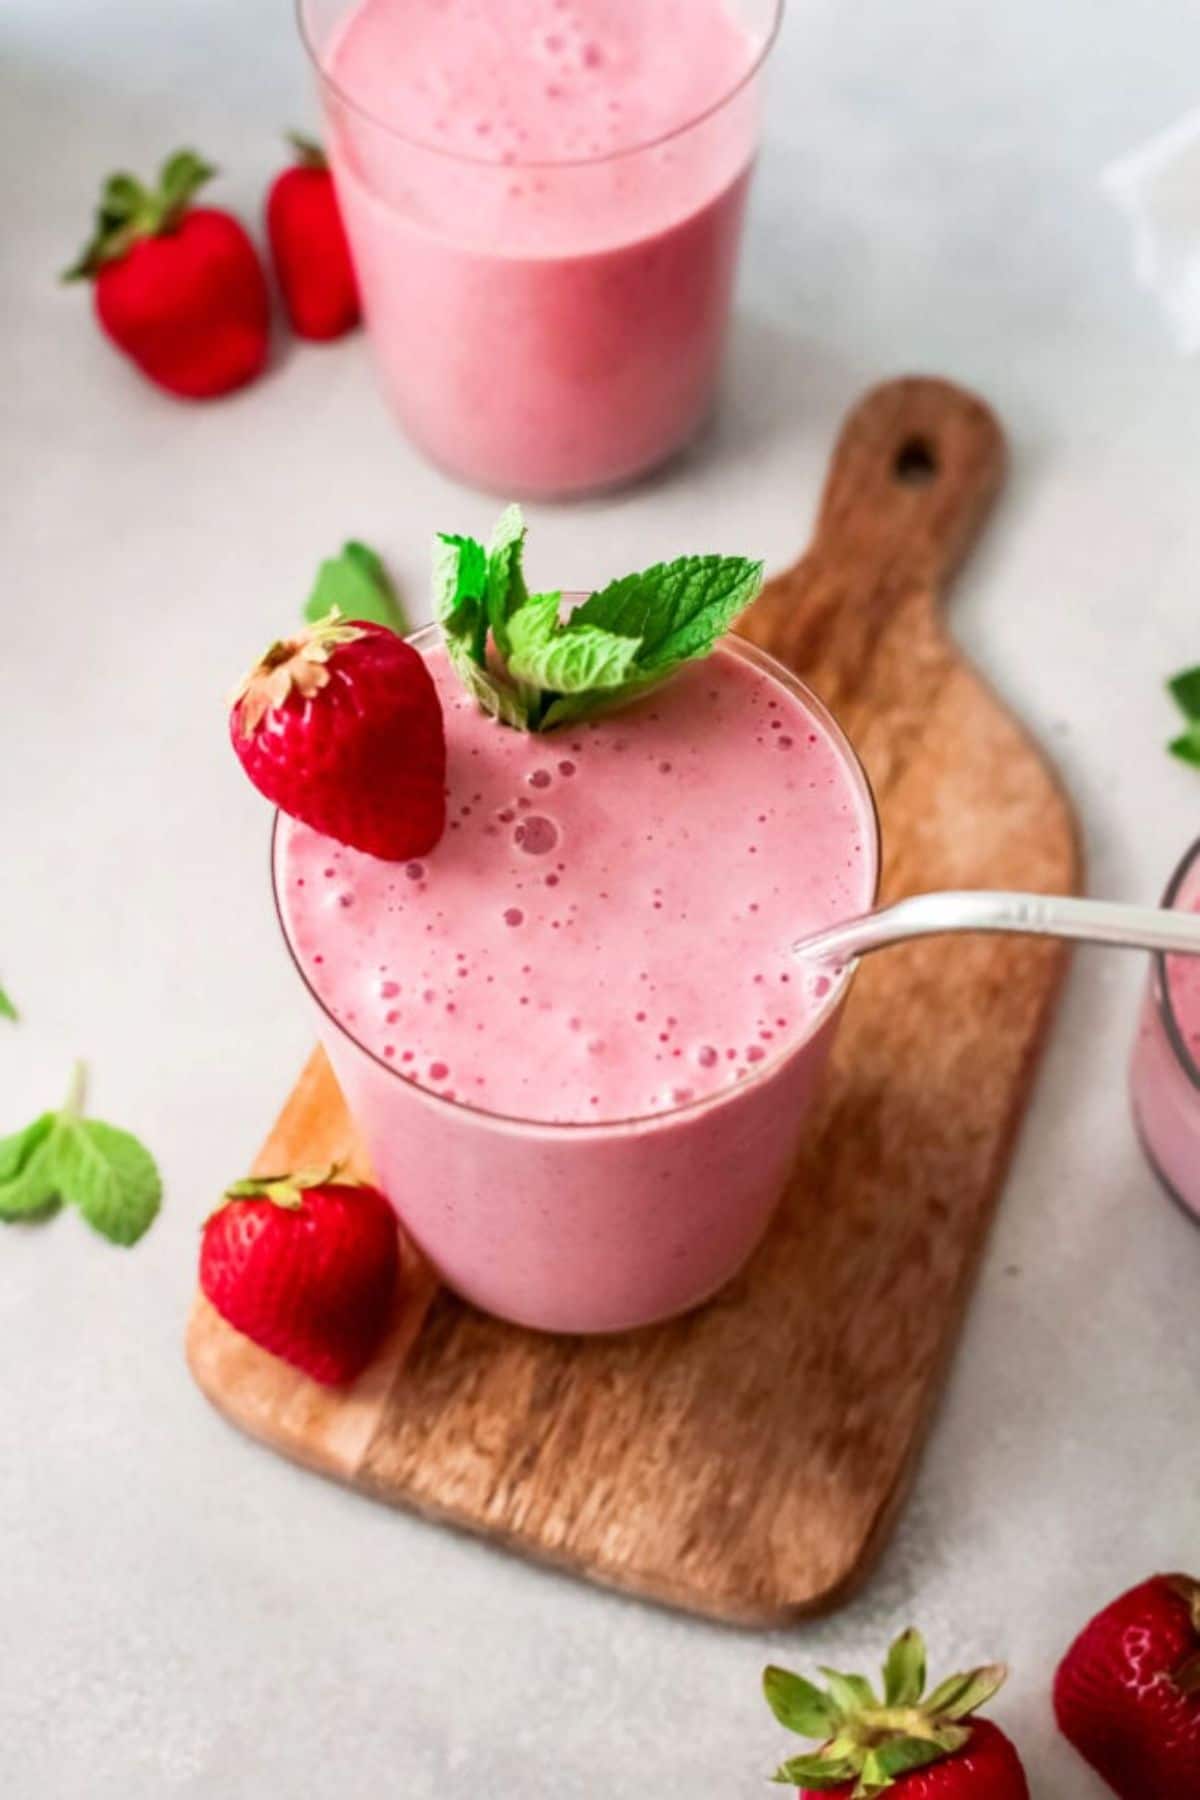 on a wooden board is a glass full of a pink smoothie, garnished with a strawberry and mint sprig.